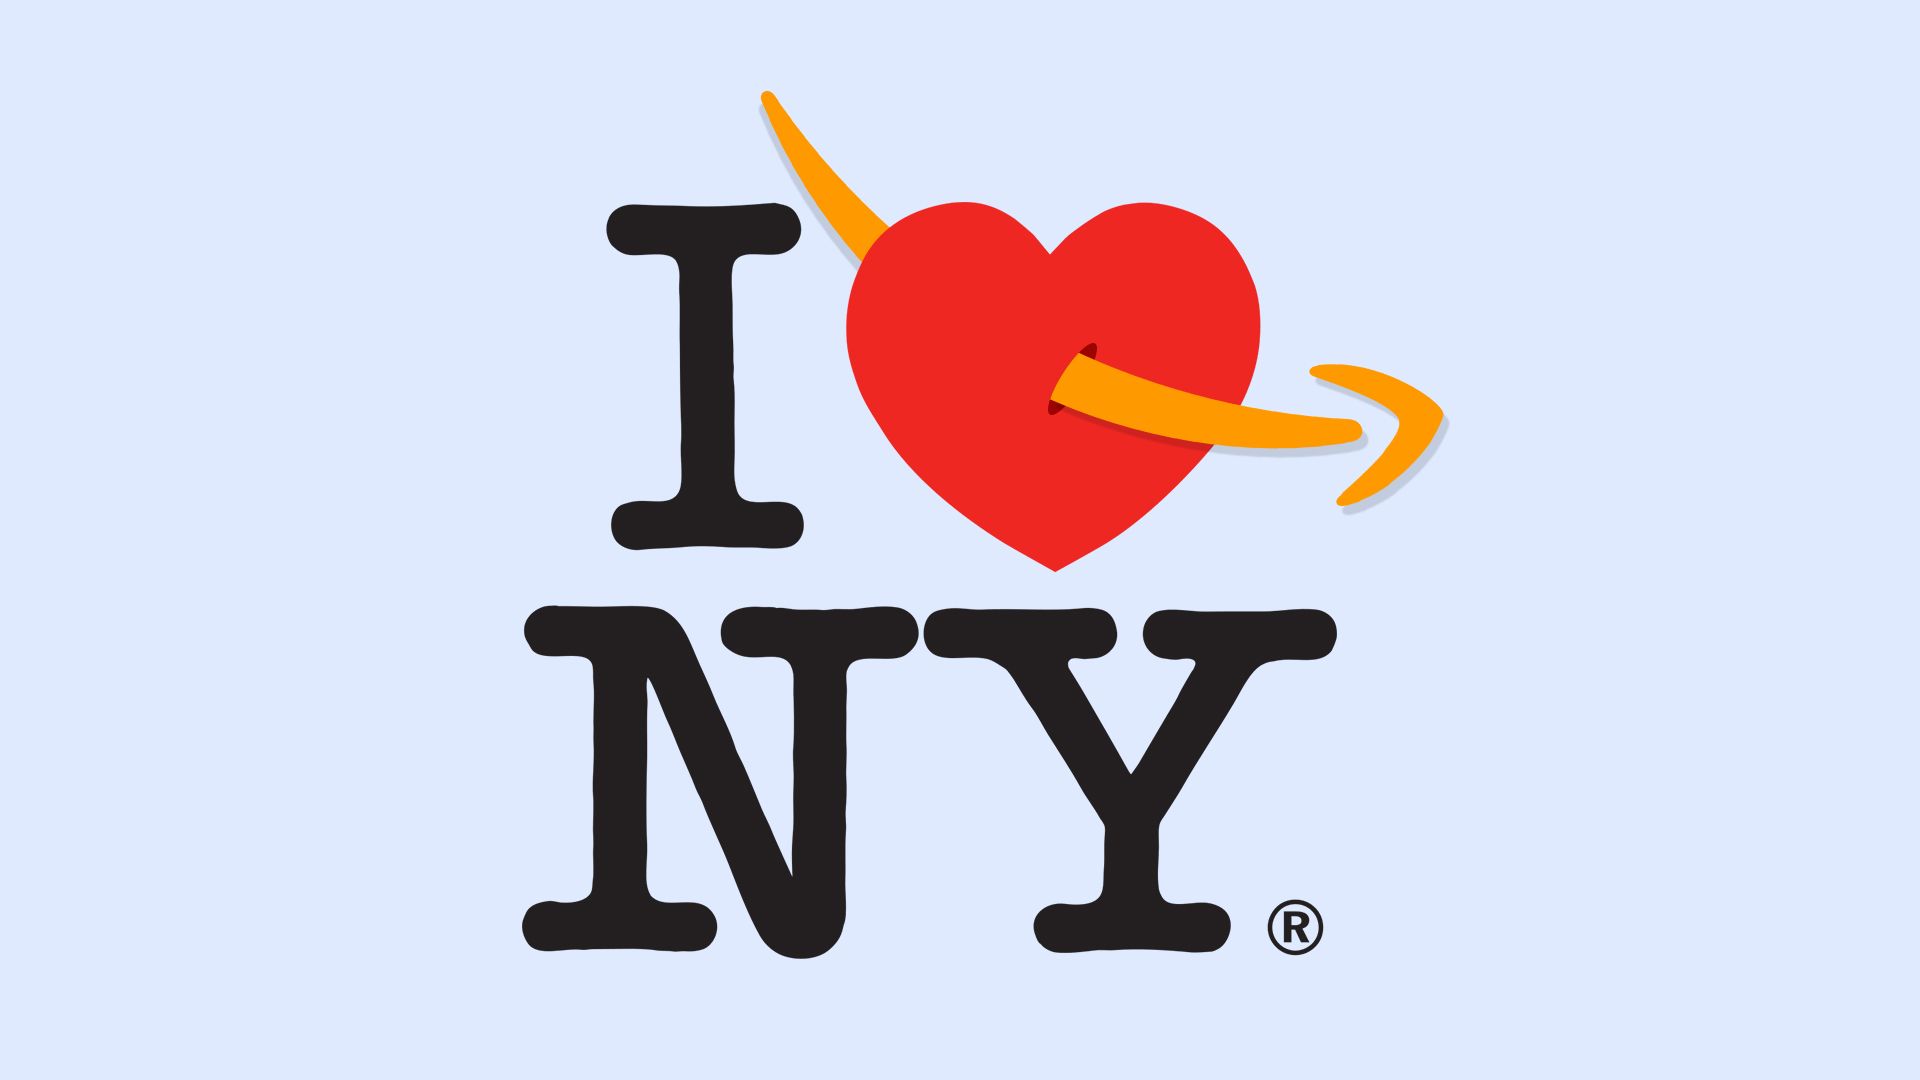 Illustration of I love NY lettering with Amazon arrow piercing the heart